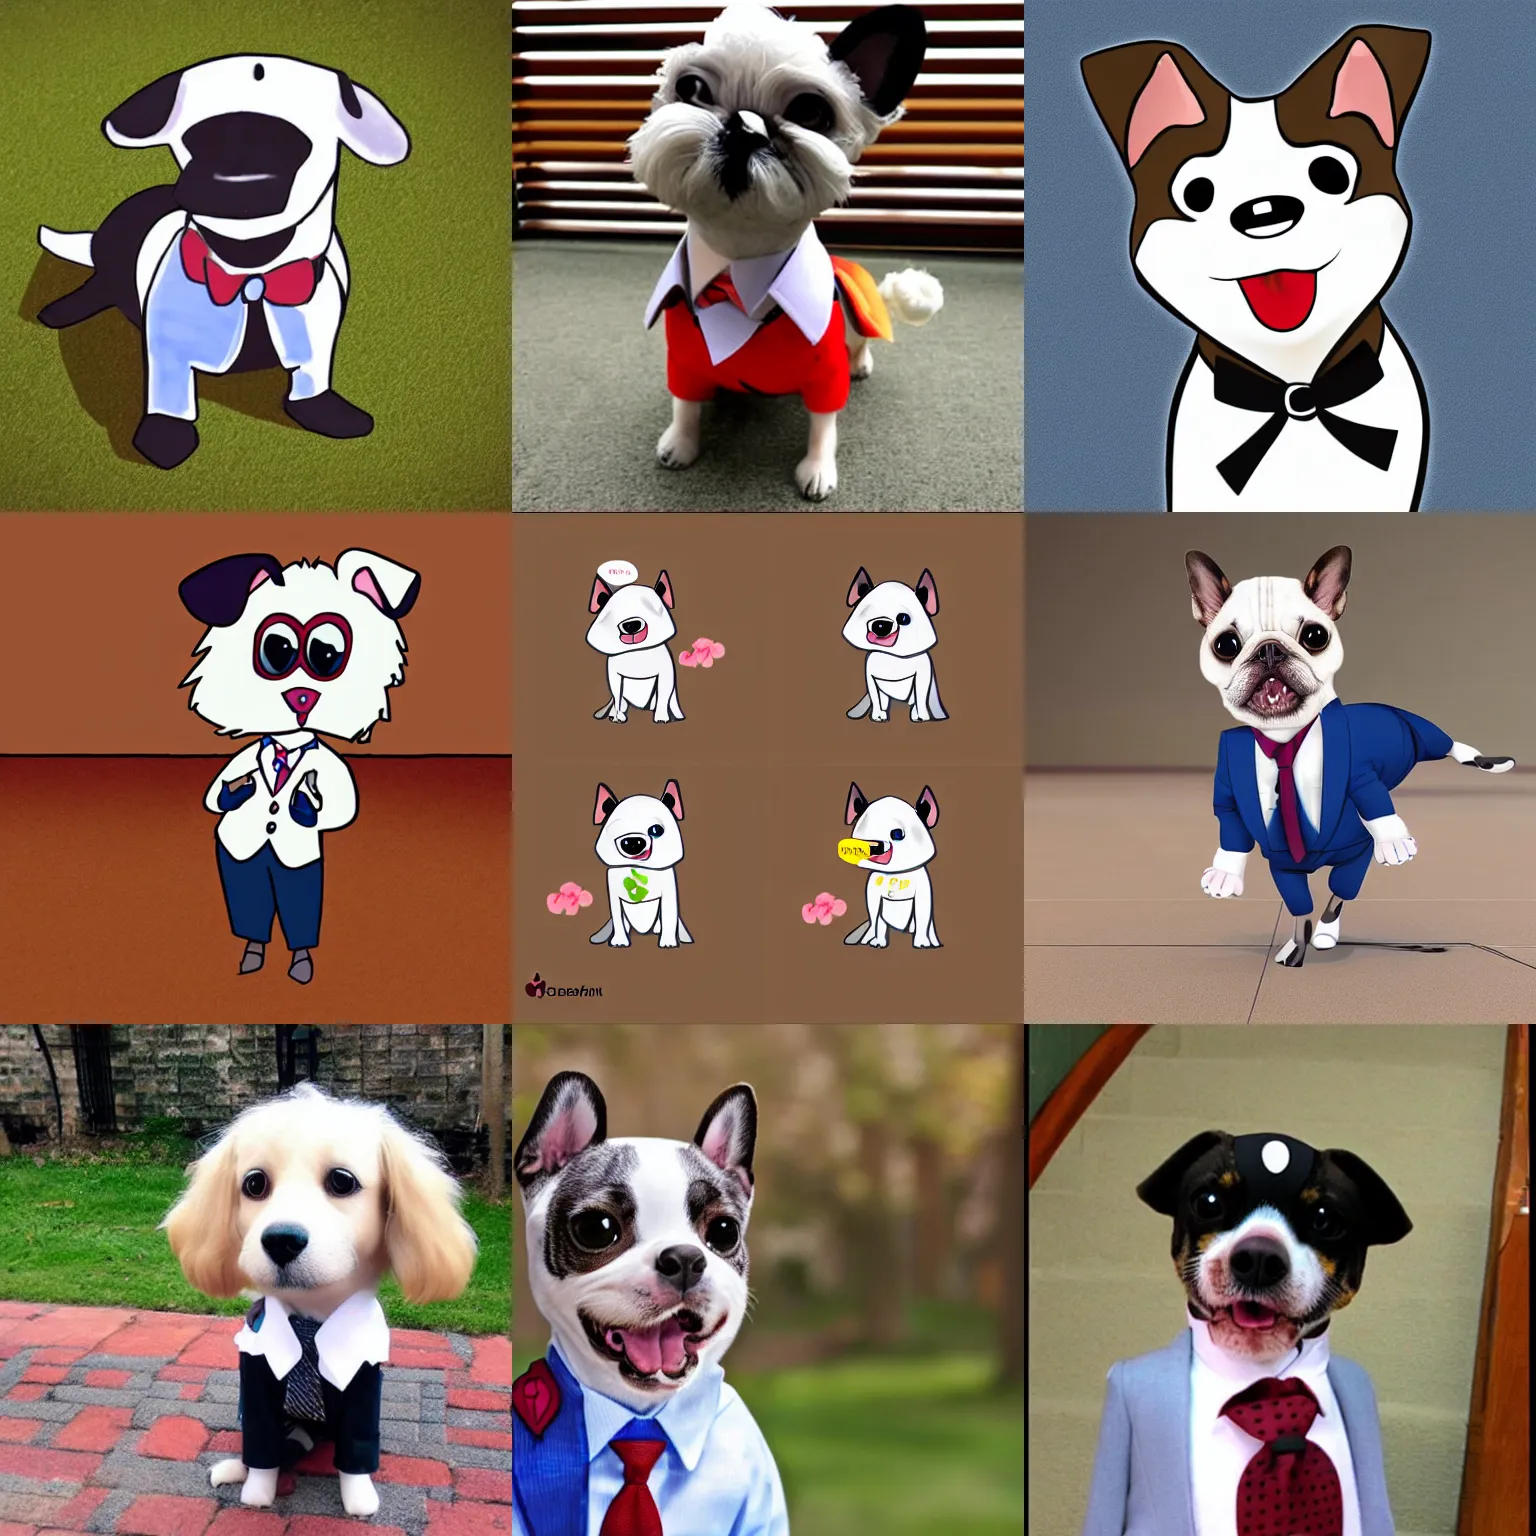 Prompt: cute cartoon dog wearing a suit